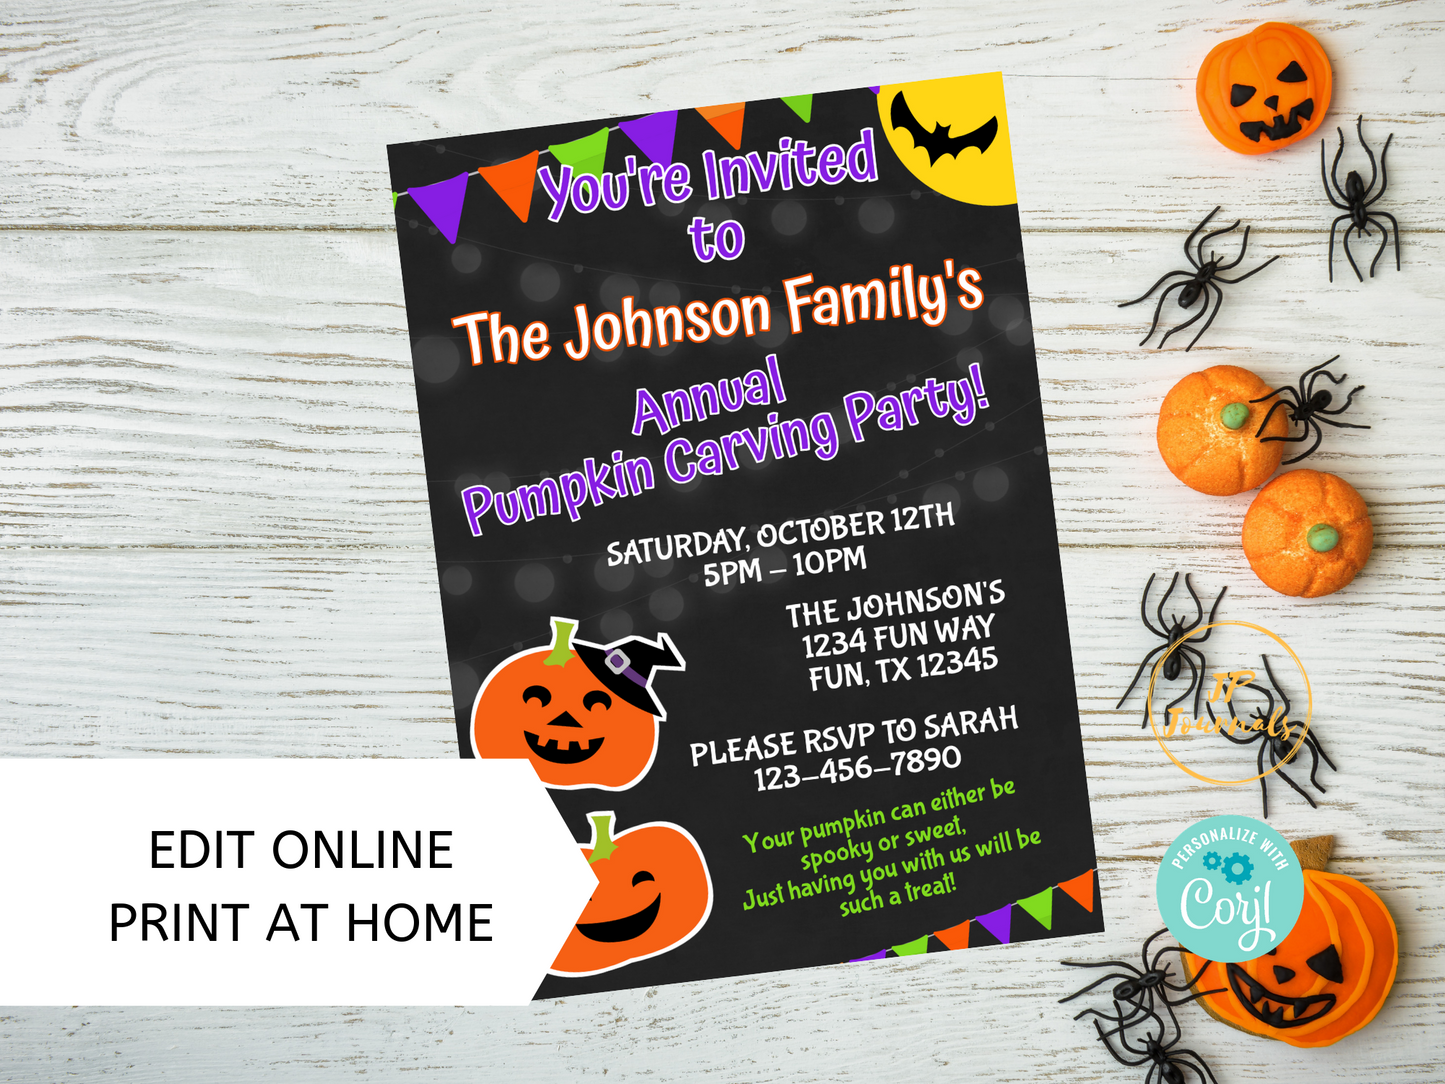 Pumpkin Carving Party Invitation - Printable Template